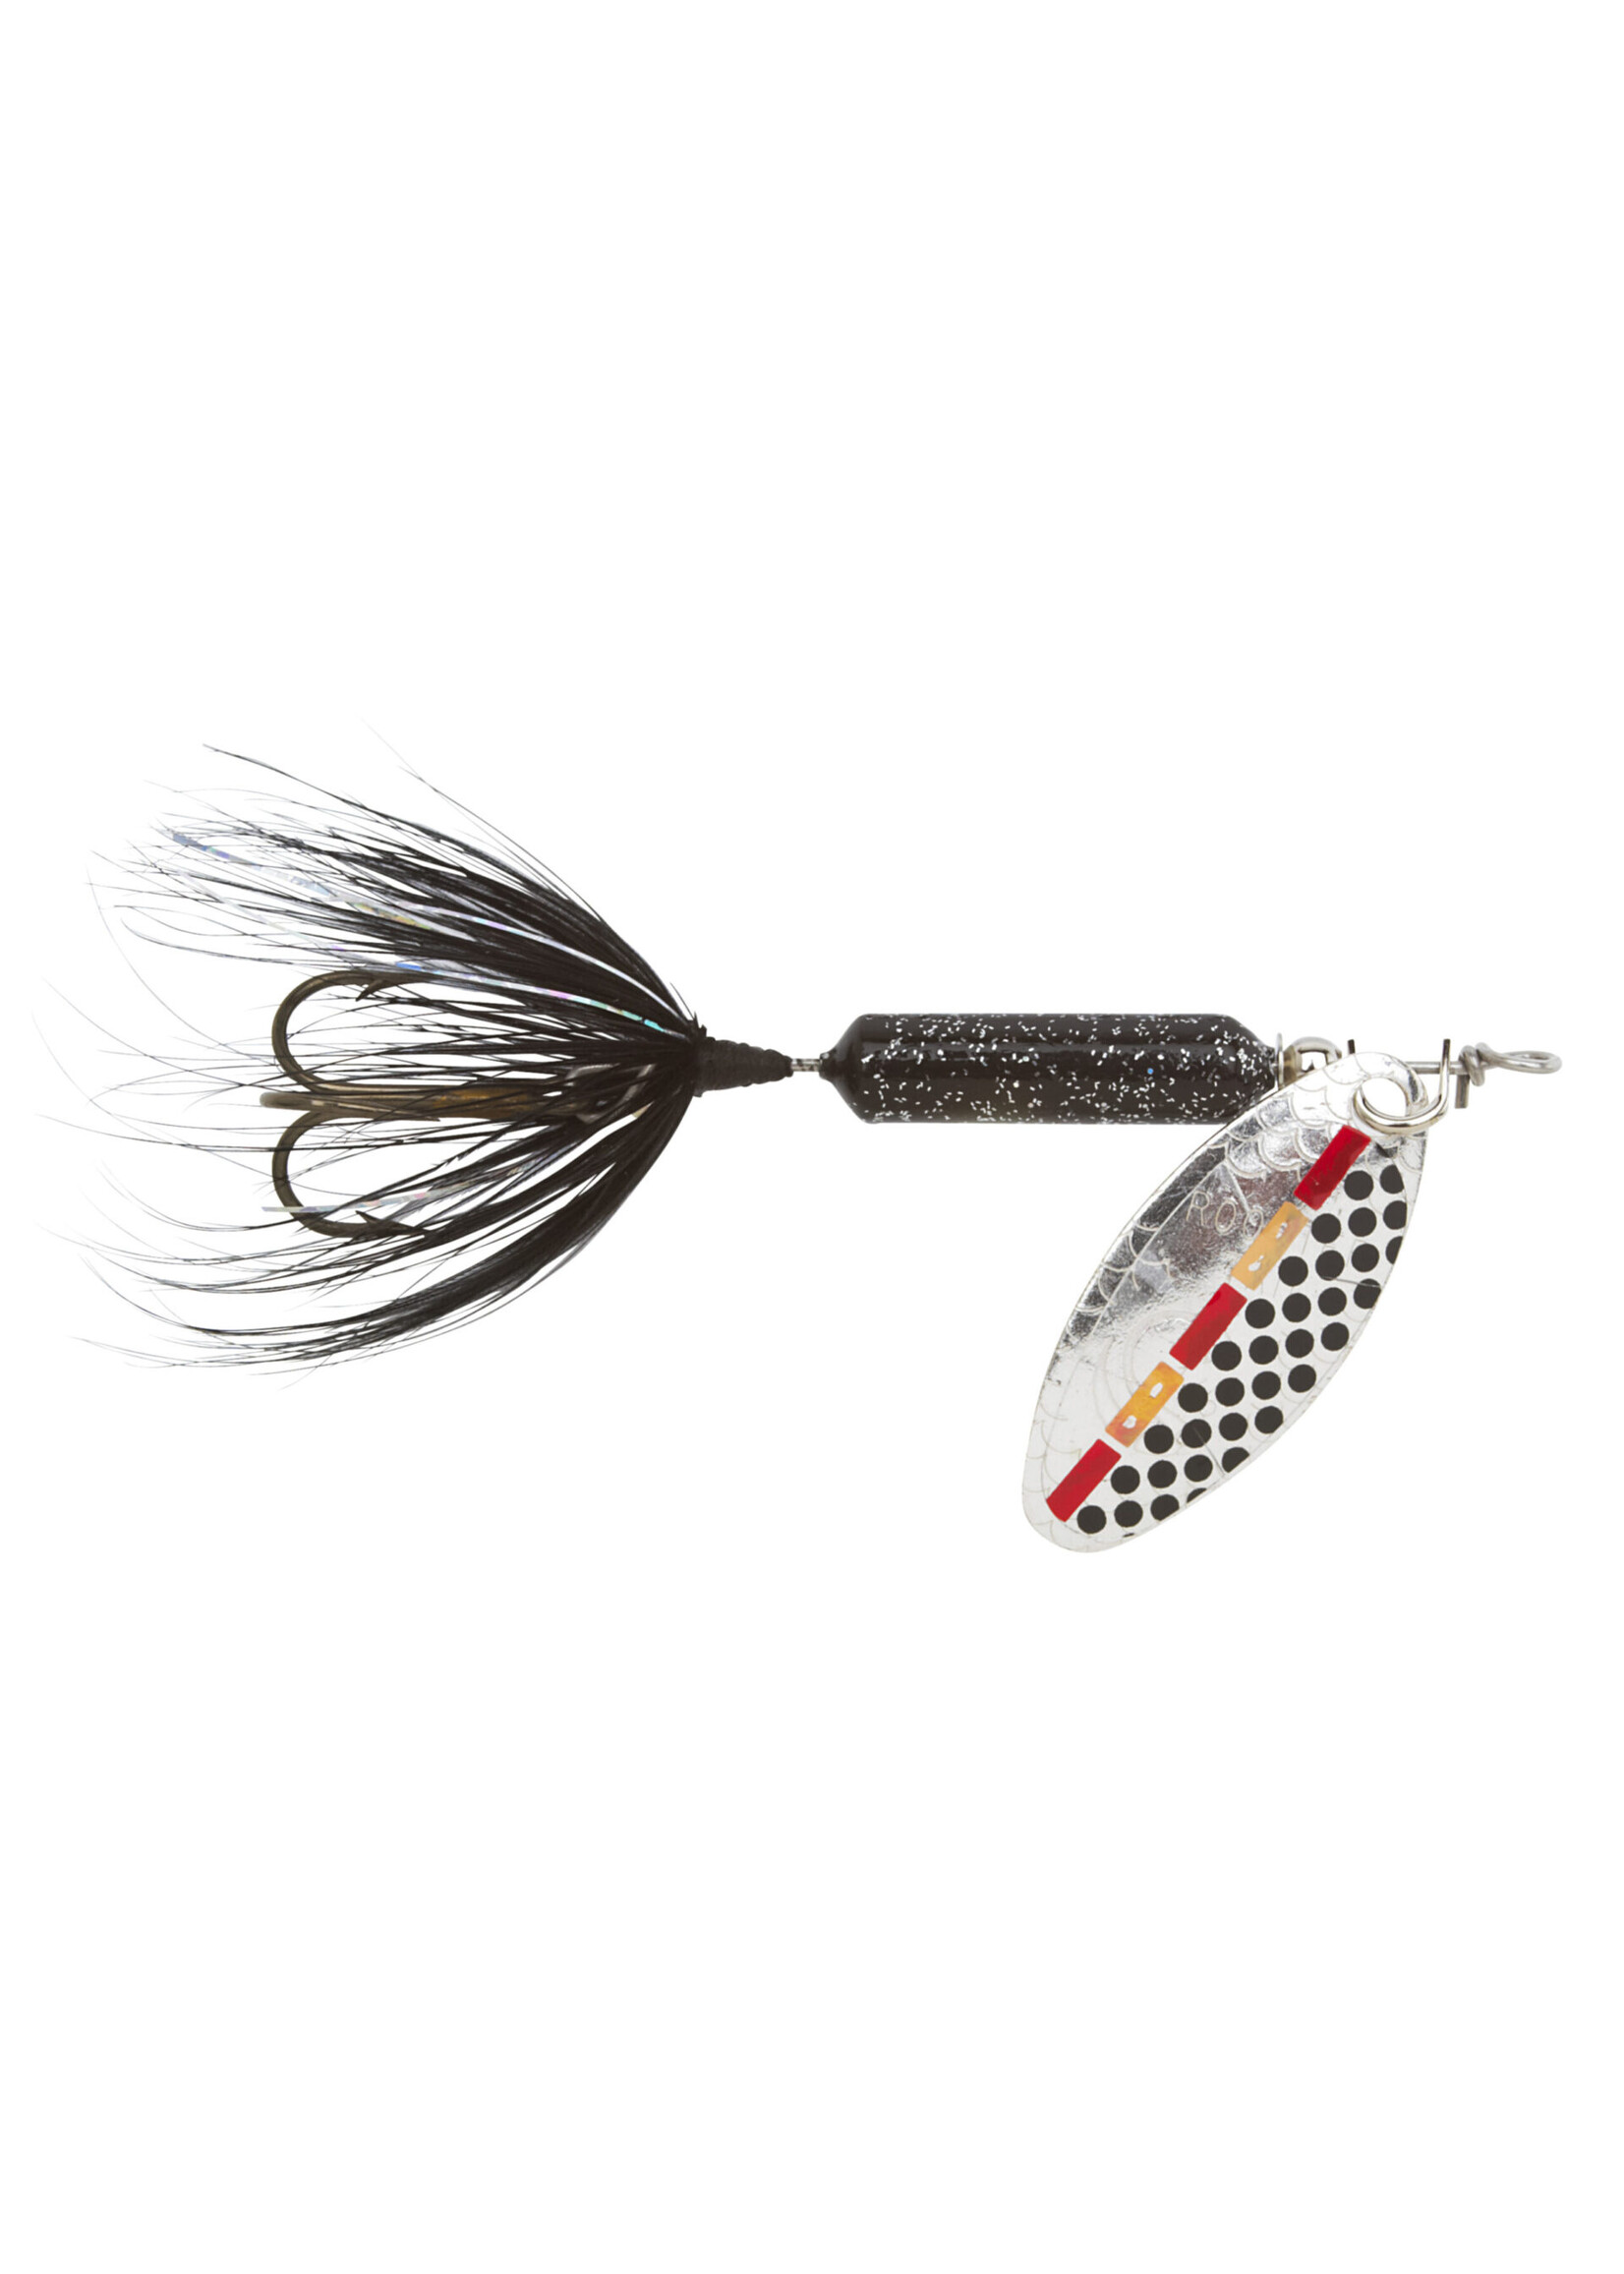 VMSIXVM Rooster Tail Fishing Lures, Spinner Baits Lure for Bass Trout Salmon  Pike, Trout Spinnerbaits Fly Strikers Lure with Brass Spinner Blade for  Freshwater Saltwater: Buy Online at Best Price in UAE 